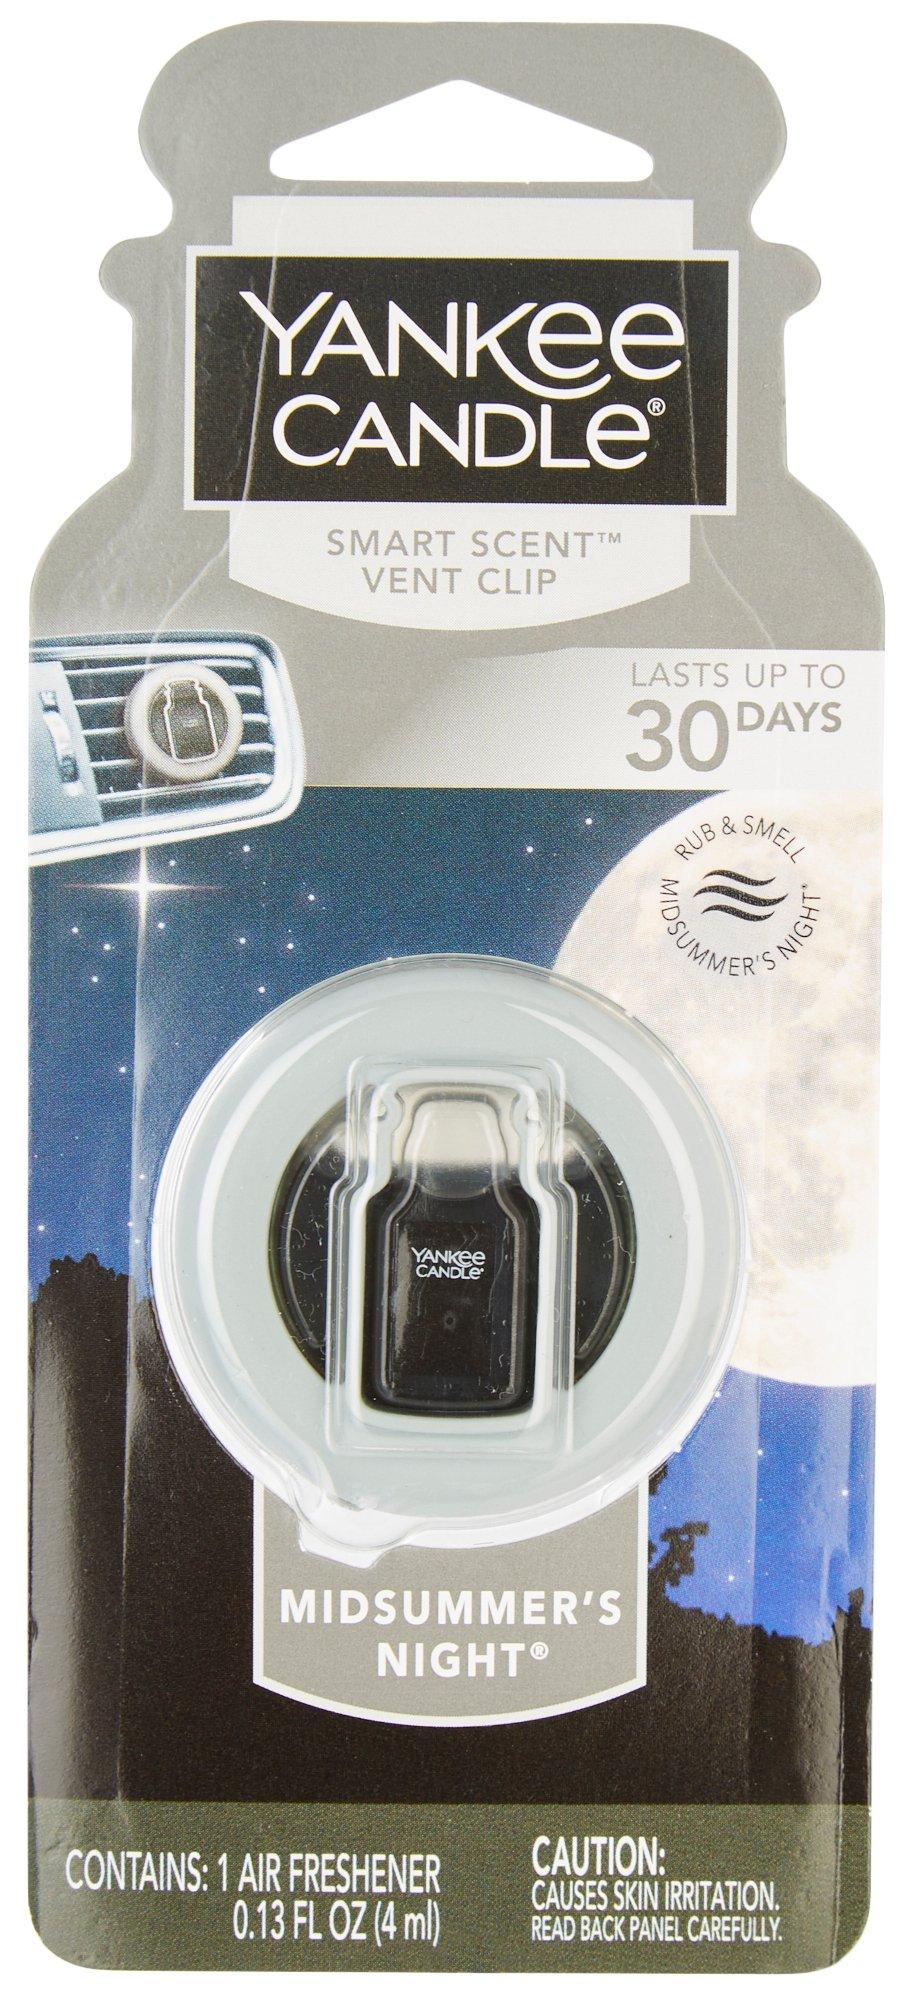 Yankee Candle Midsummers Night Smart Scent Vent Clip